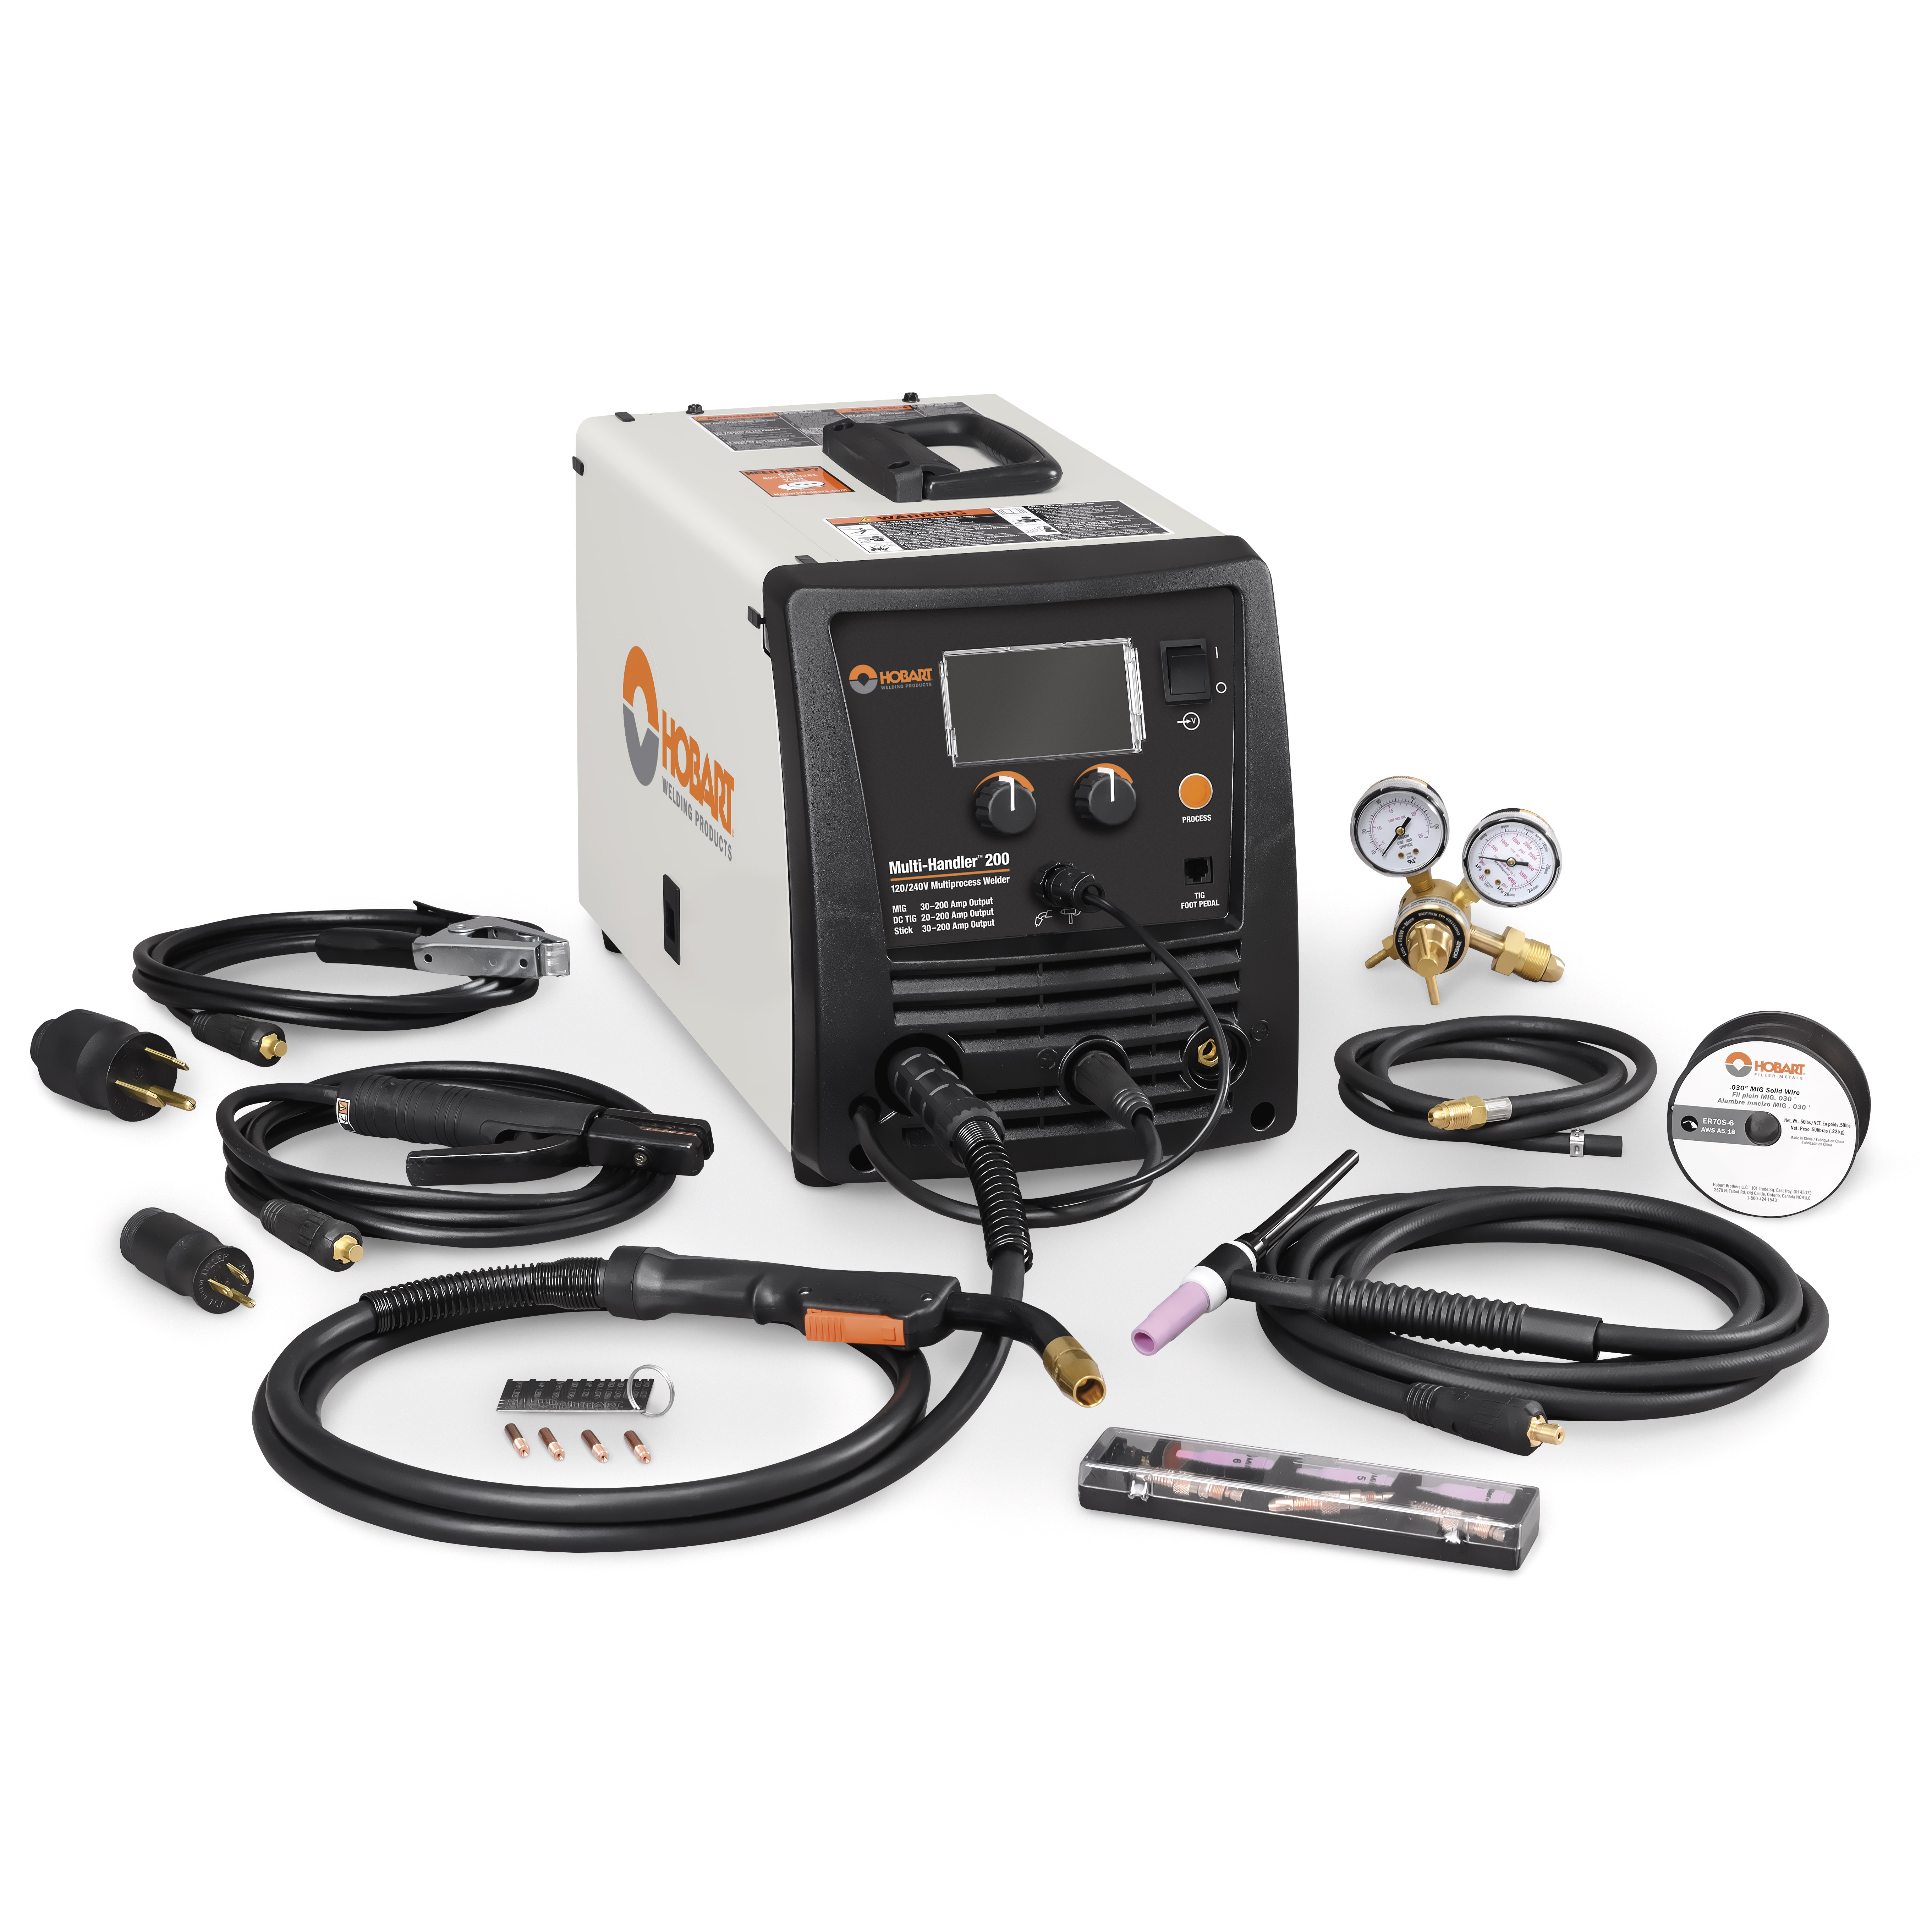 Maximm 30 ft Safety Extension Cord - Black, 16 Gauge, Heavy Duty